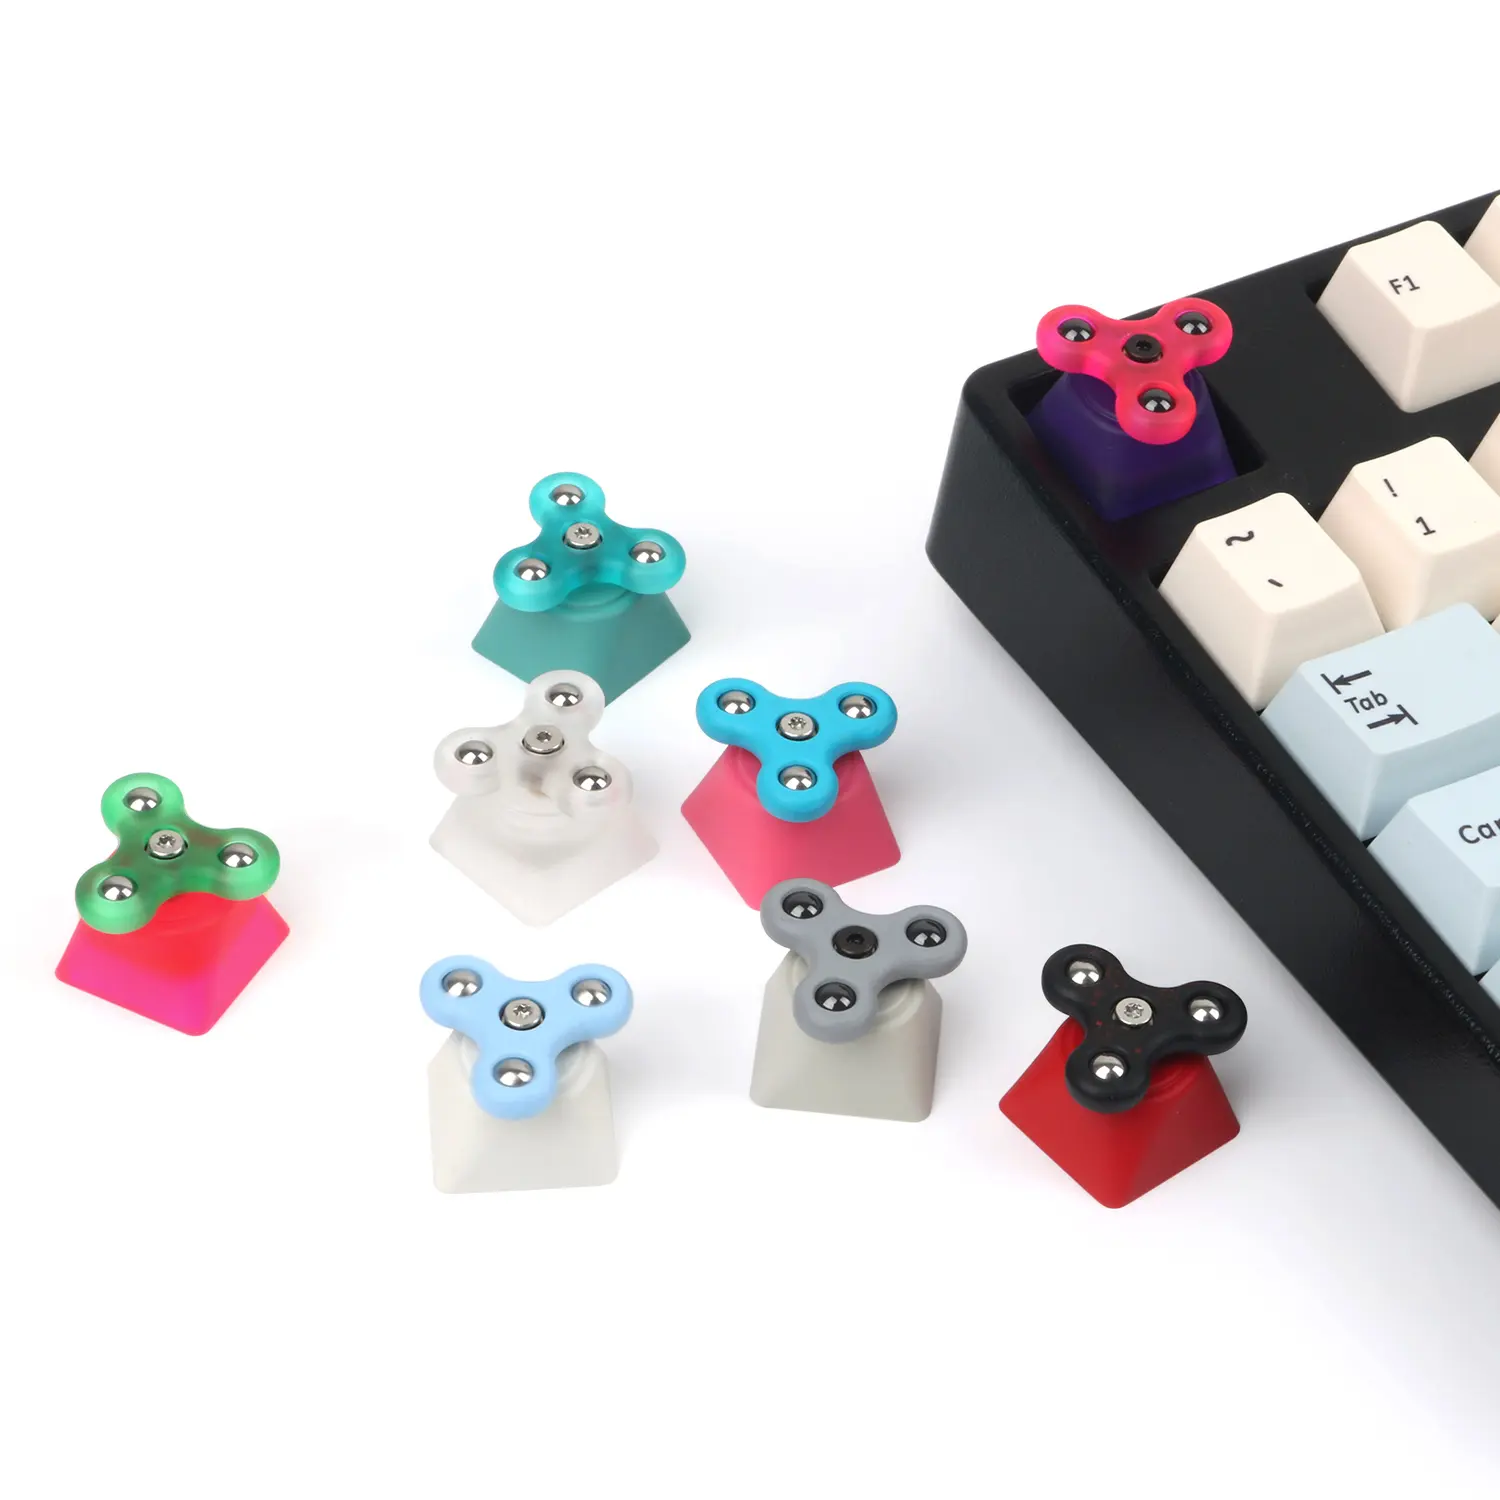 Factory Colorful Resin Fidget Spinner Artisan Keycap Compatible With Cherry MX Switches For Cherry Mx Kailh Box TTC Cross Switch